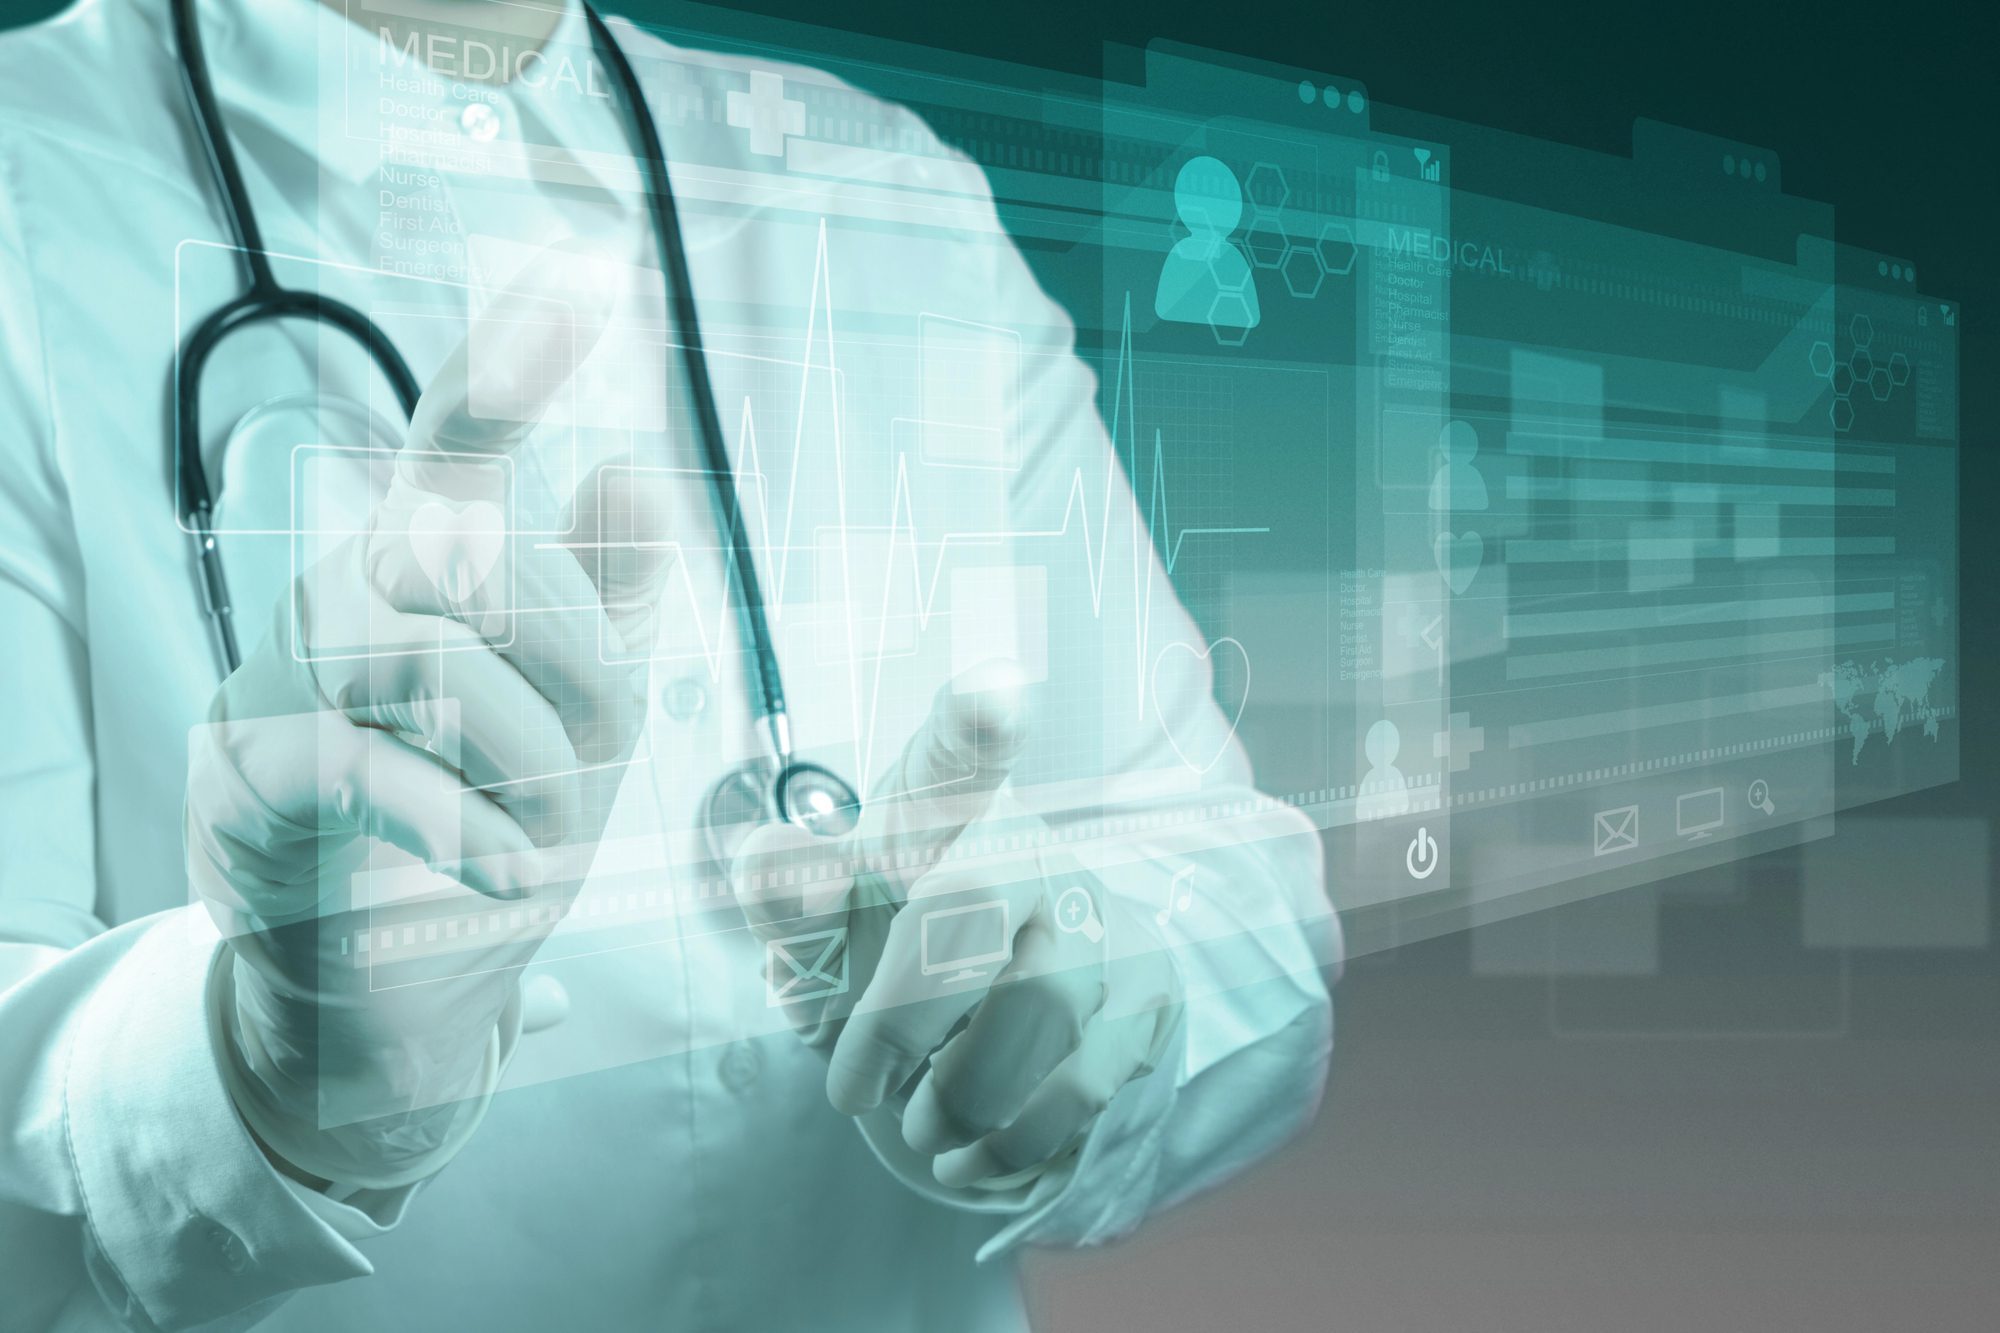 Image of a physician wearing a stethoscope and pointing to superimposed healthcare data symbols